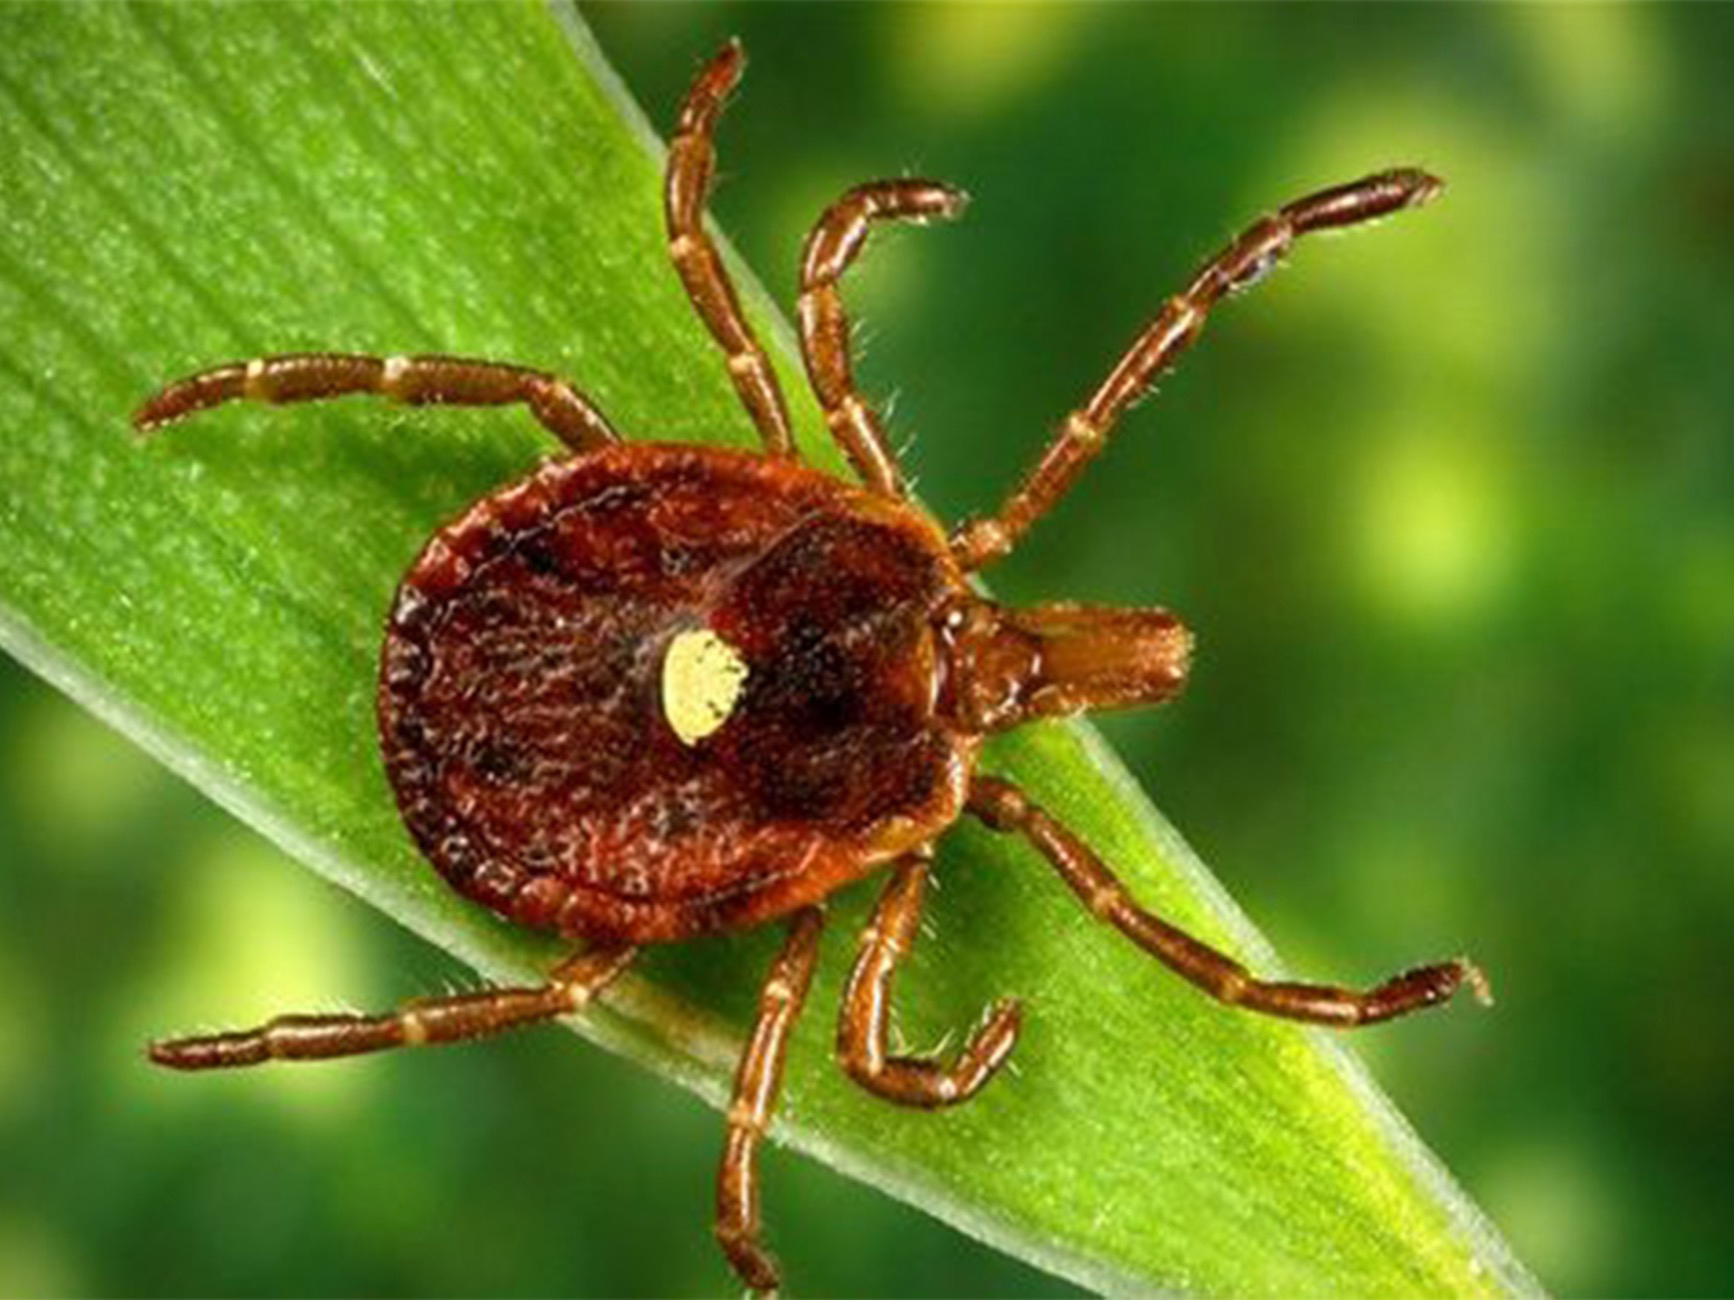 Image of a lone star tick